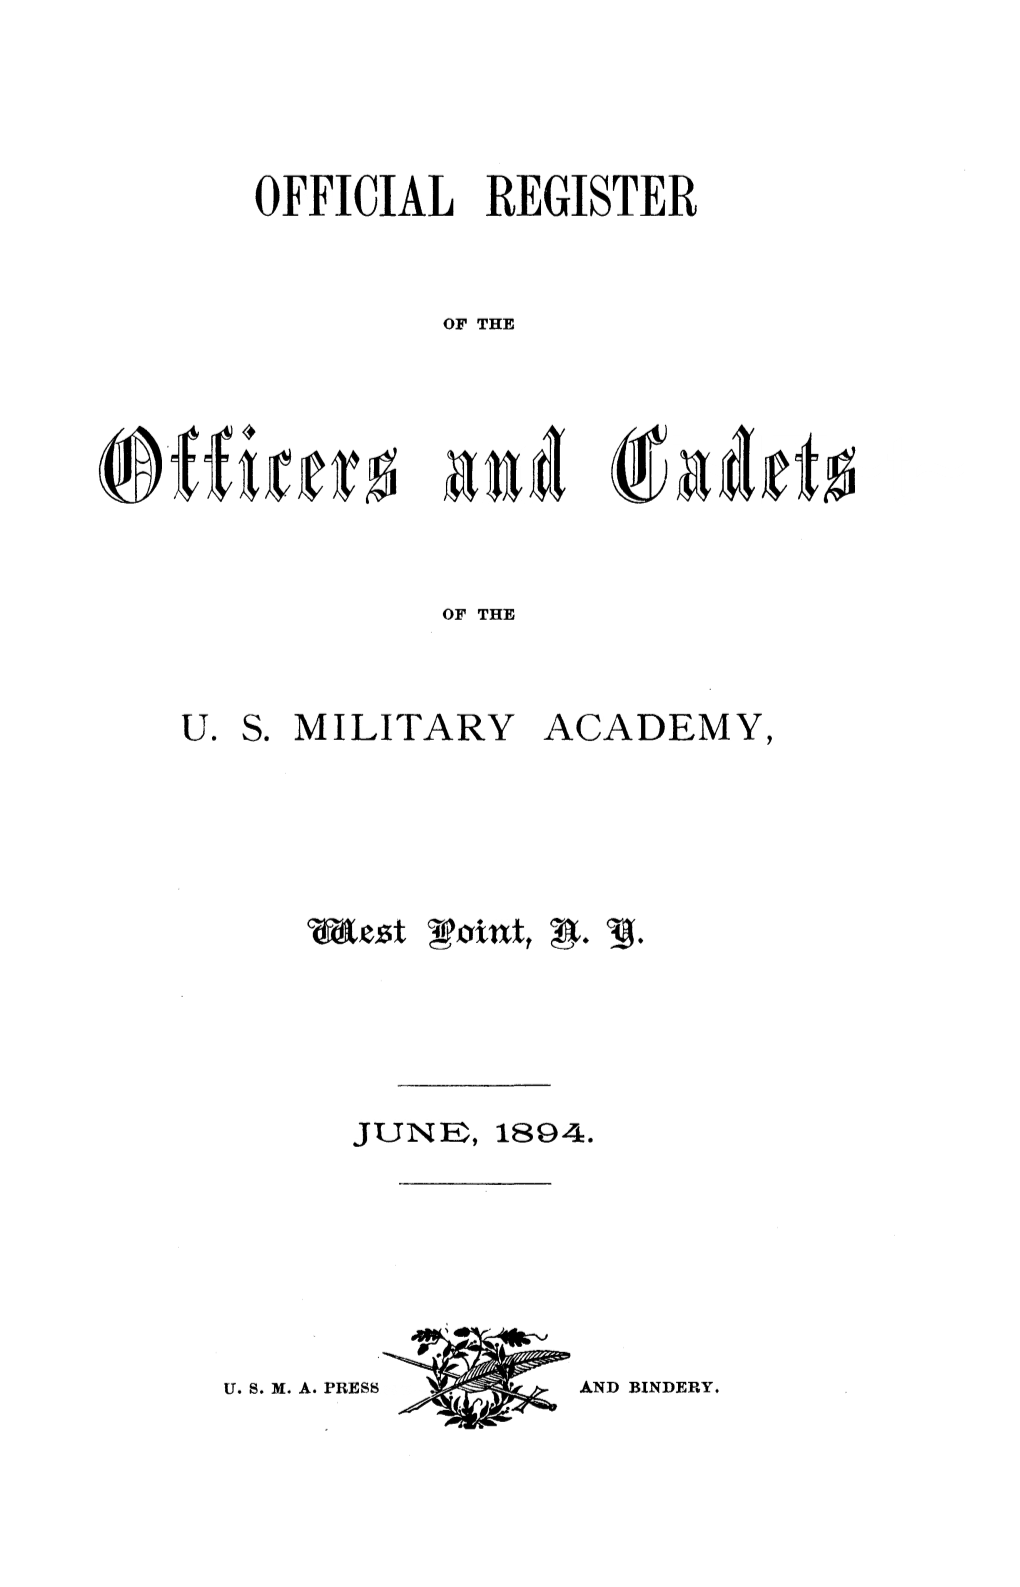 Official Register of the Officers and Cadets of the U.S. Military Academy, West Point, N.Y. 1894